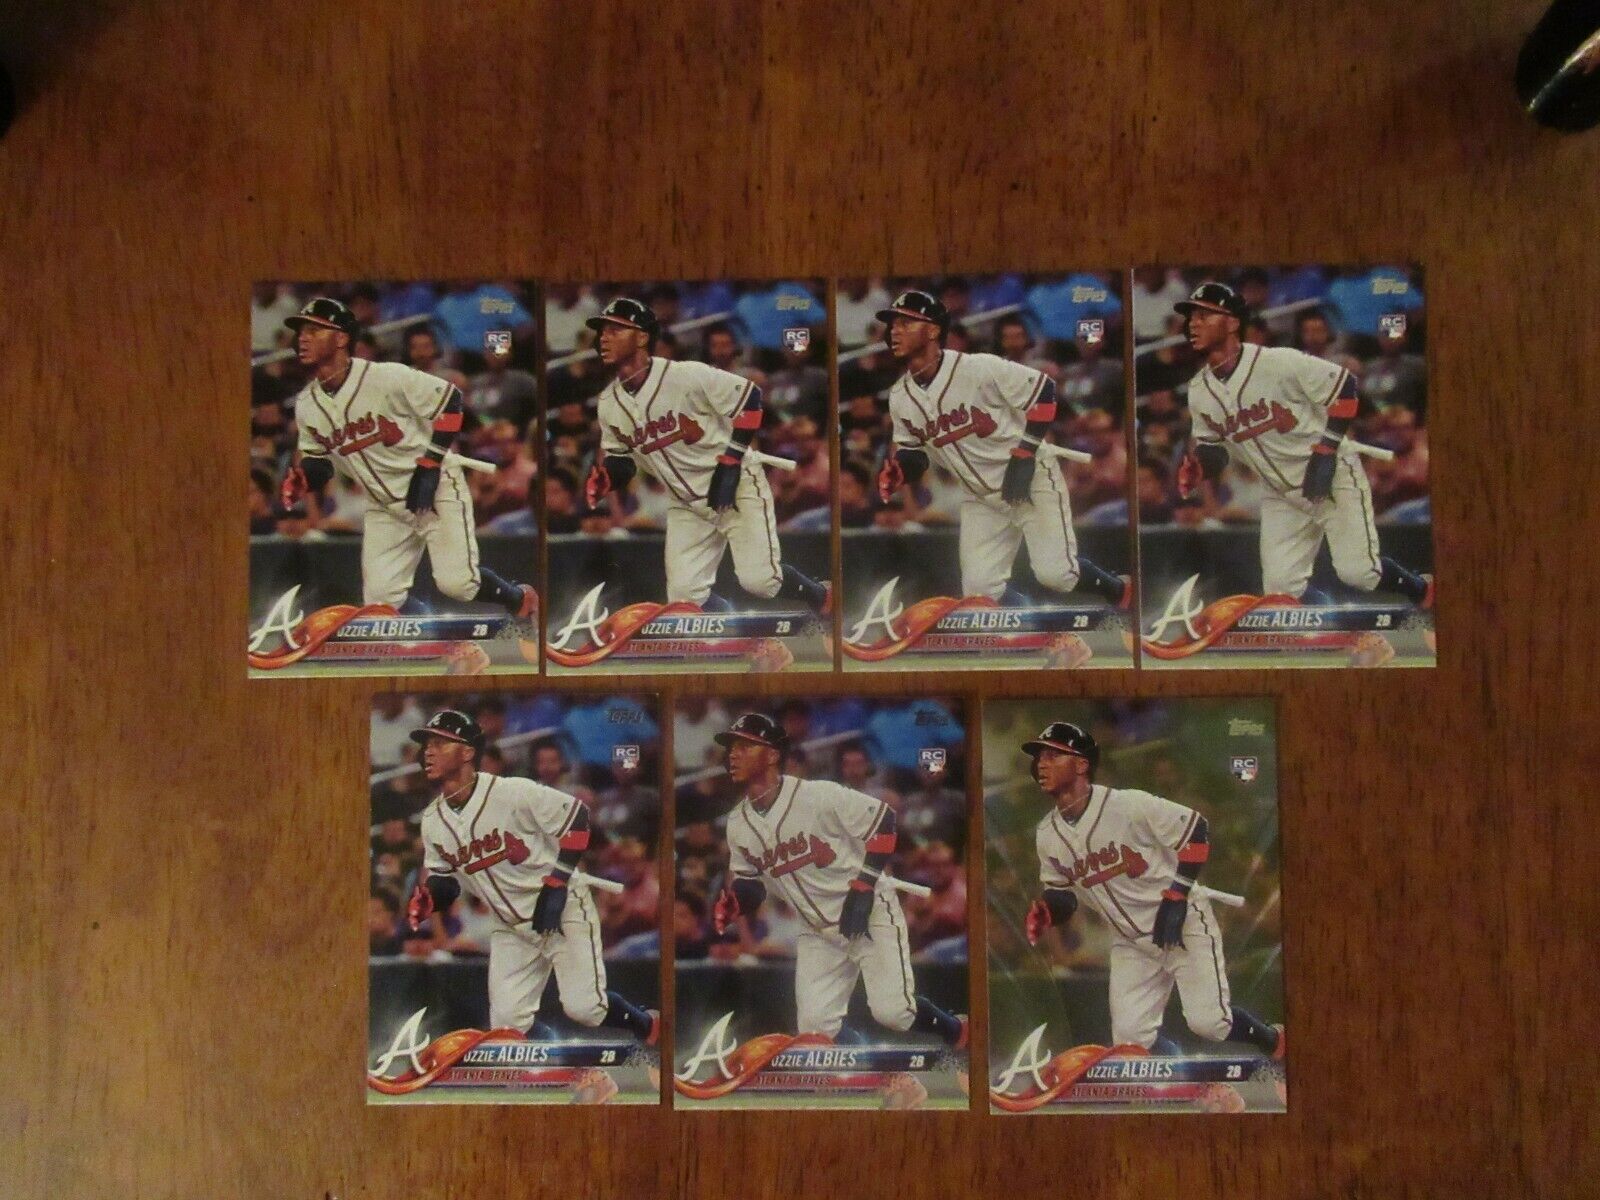 OZZIE ALBIES 2018 TOPPS BASEBALL ROOKIE CARD (7) CARD LOT BRAVES ON FIRE Без бренда